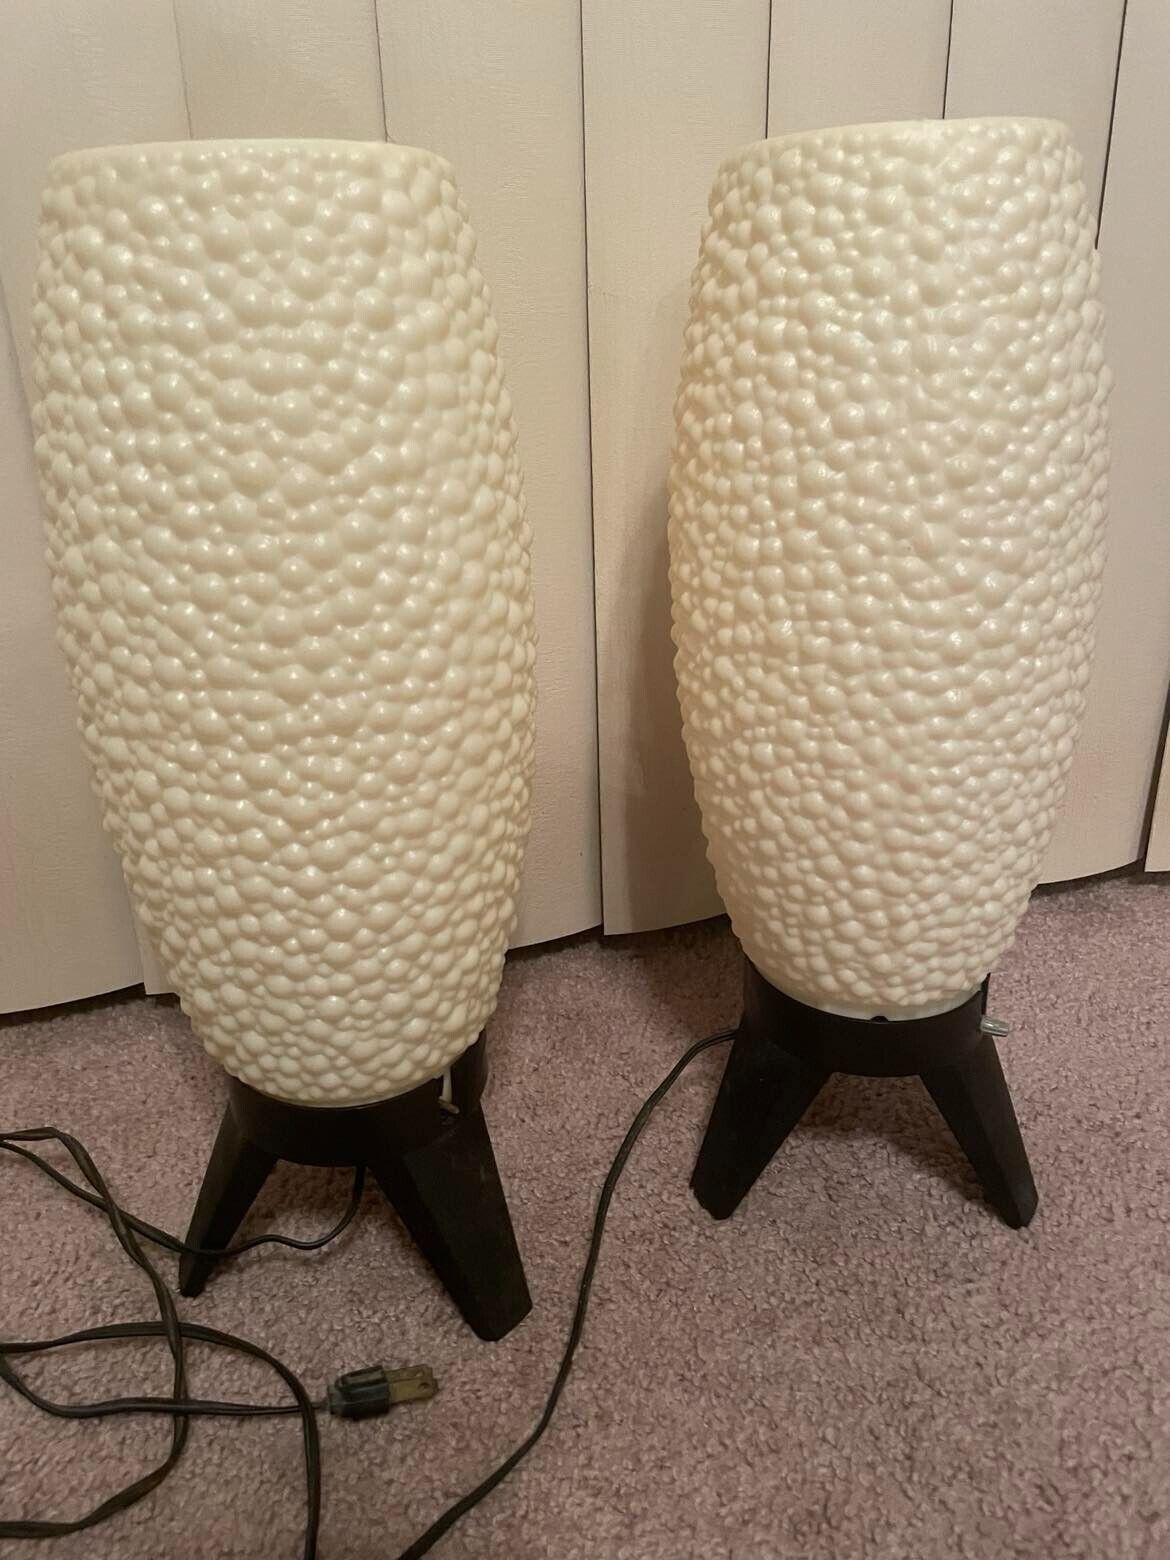 A PAIR OF VINTAGE MID CENTURY MODERN WHITE BUBBLE BEEHIVE TRIPOD LAMPS 